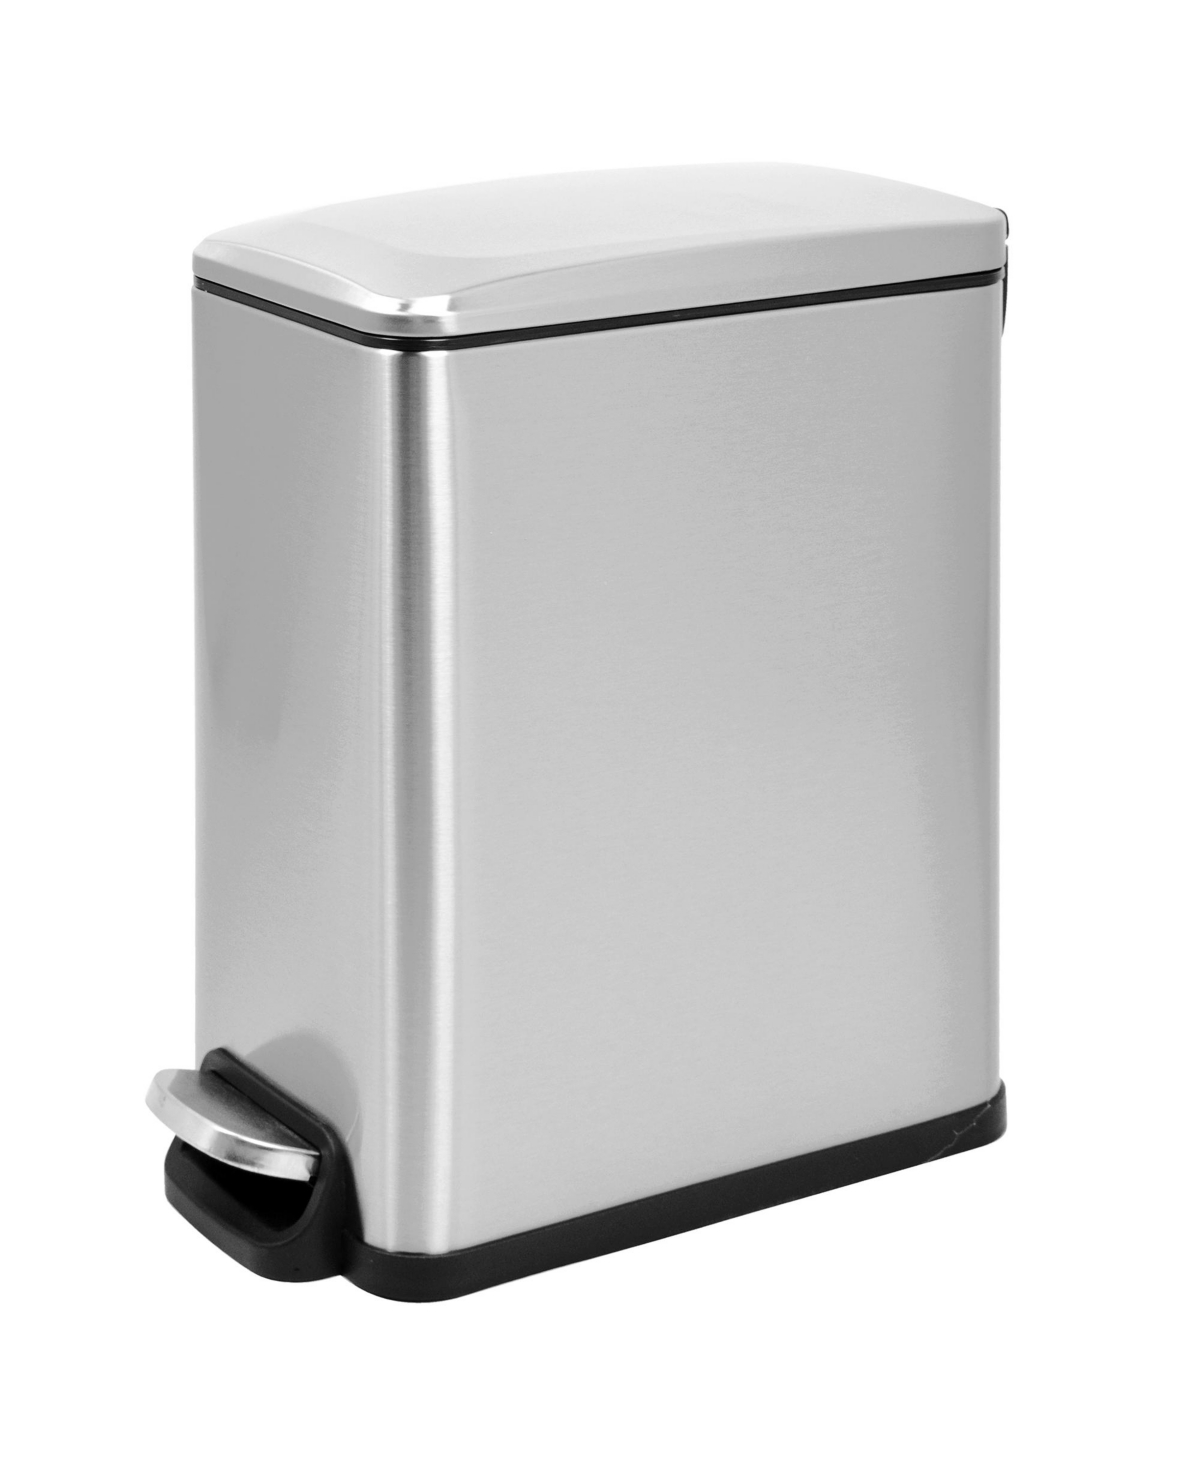 2.6 Gal./10 Liter Slim Stainless Steel Step-on Trash Can for Bathroom and Office - Silver